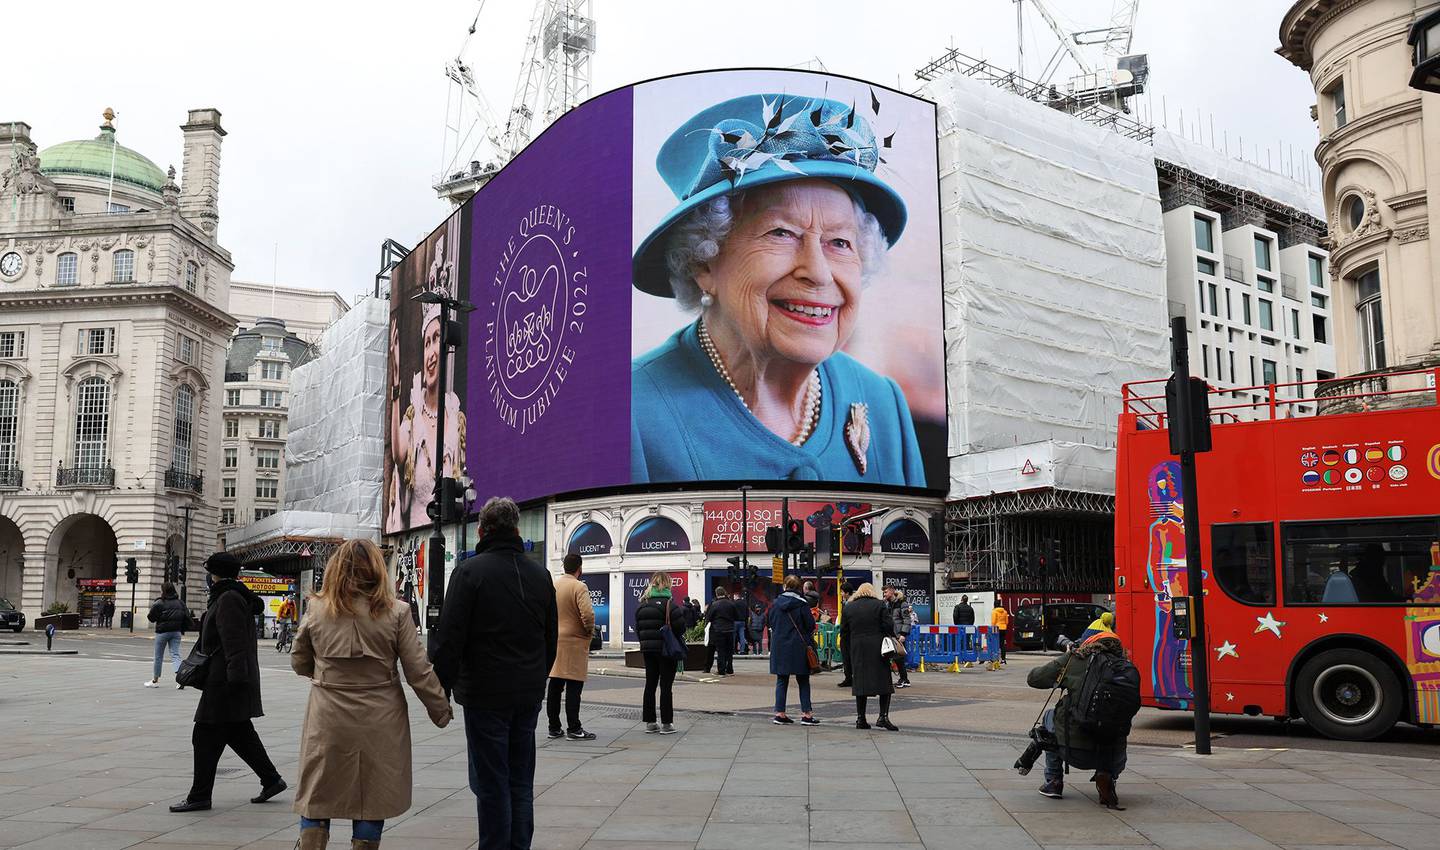 A portrait of Queen Elizabeth II is displayed on the large screen at Piccadilly Circus to mark the start of the Platinum Jubilee.